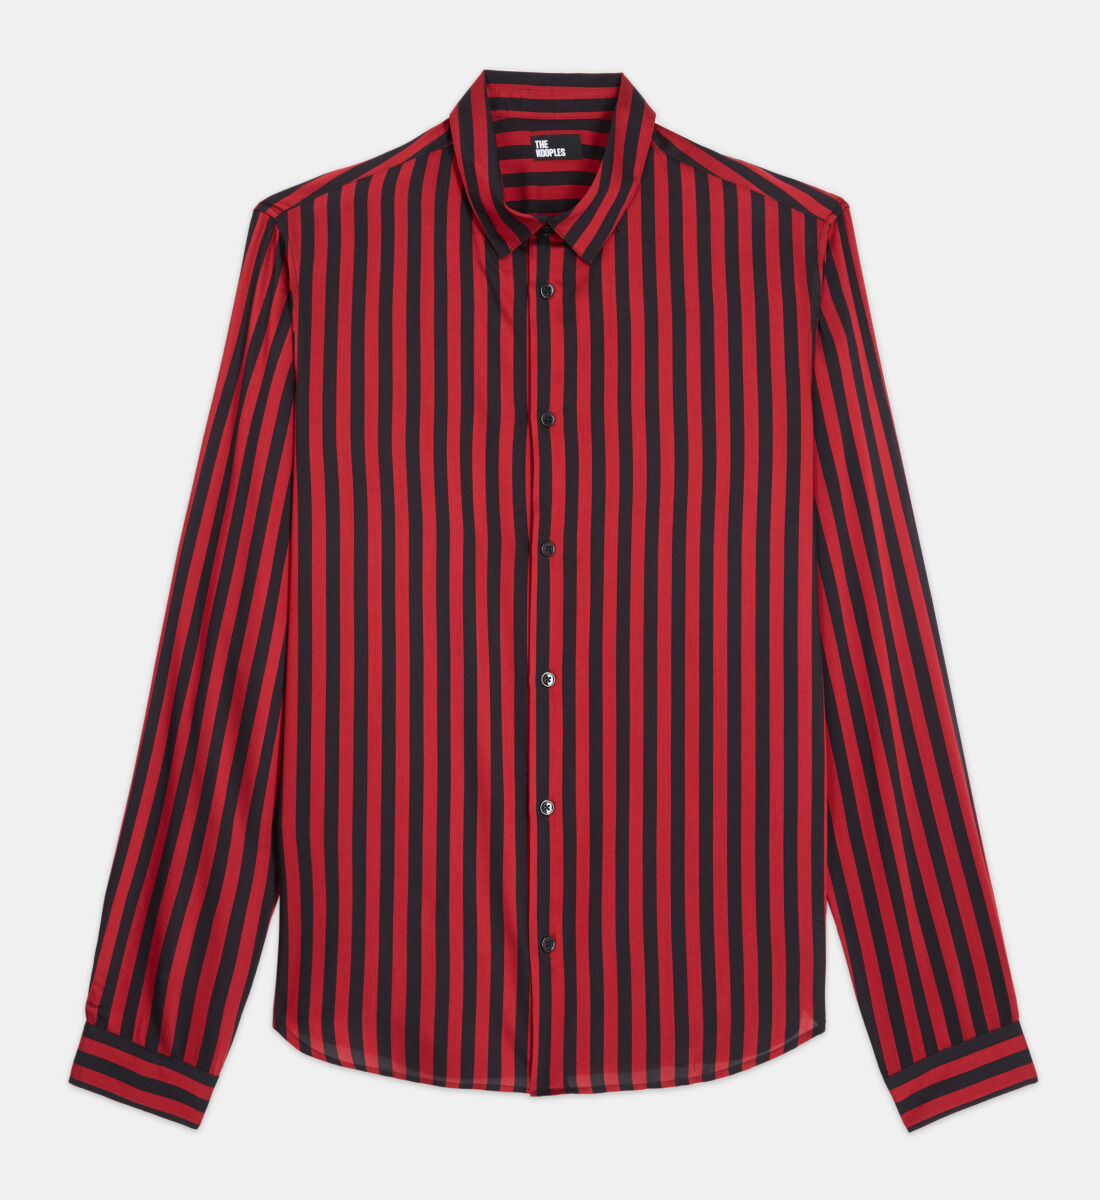 Striped shirt with classic collar | The Kooples - US